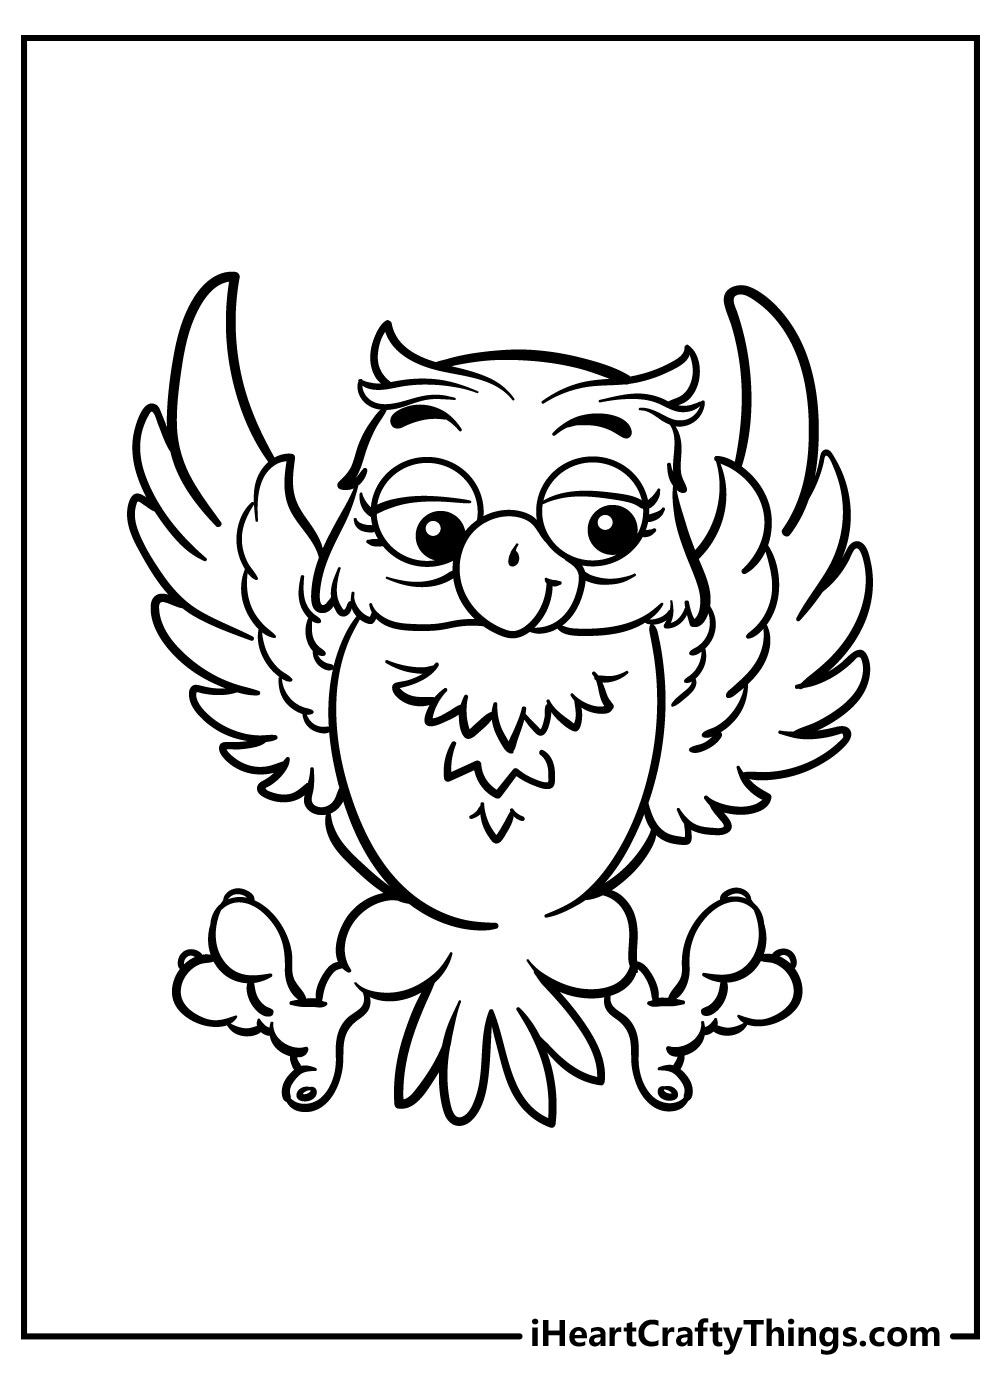 25 Wise Owl Coloring Pages